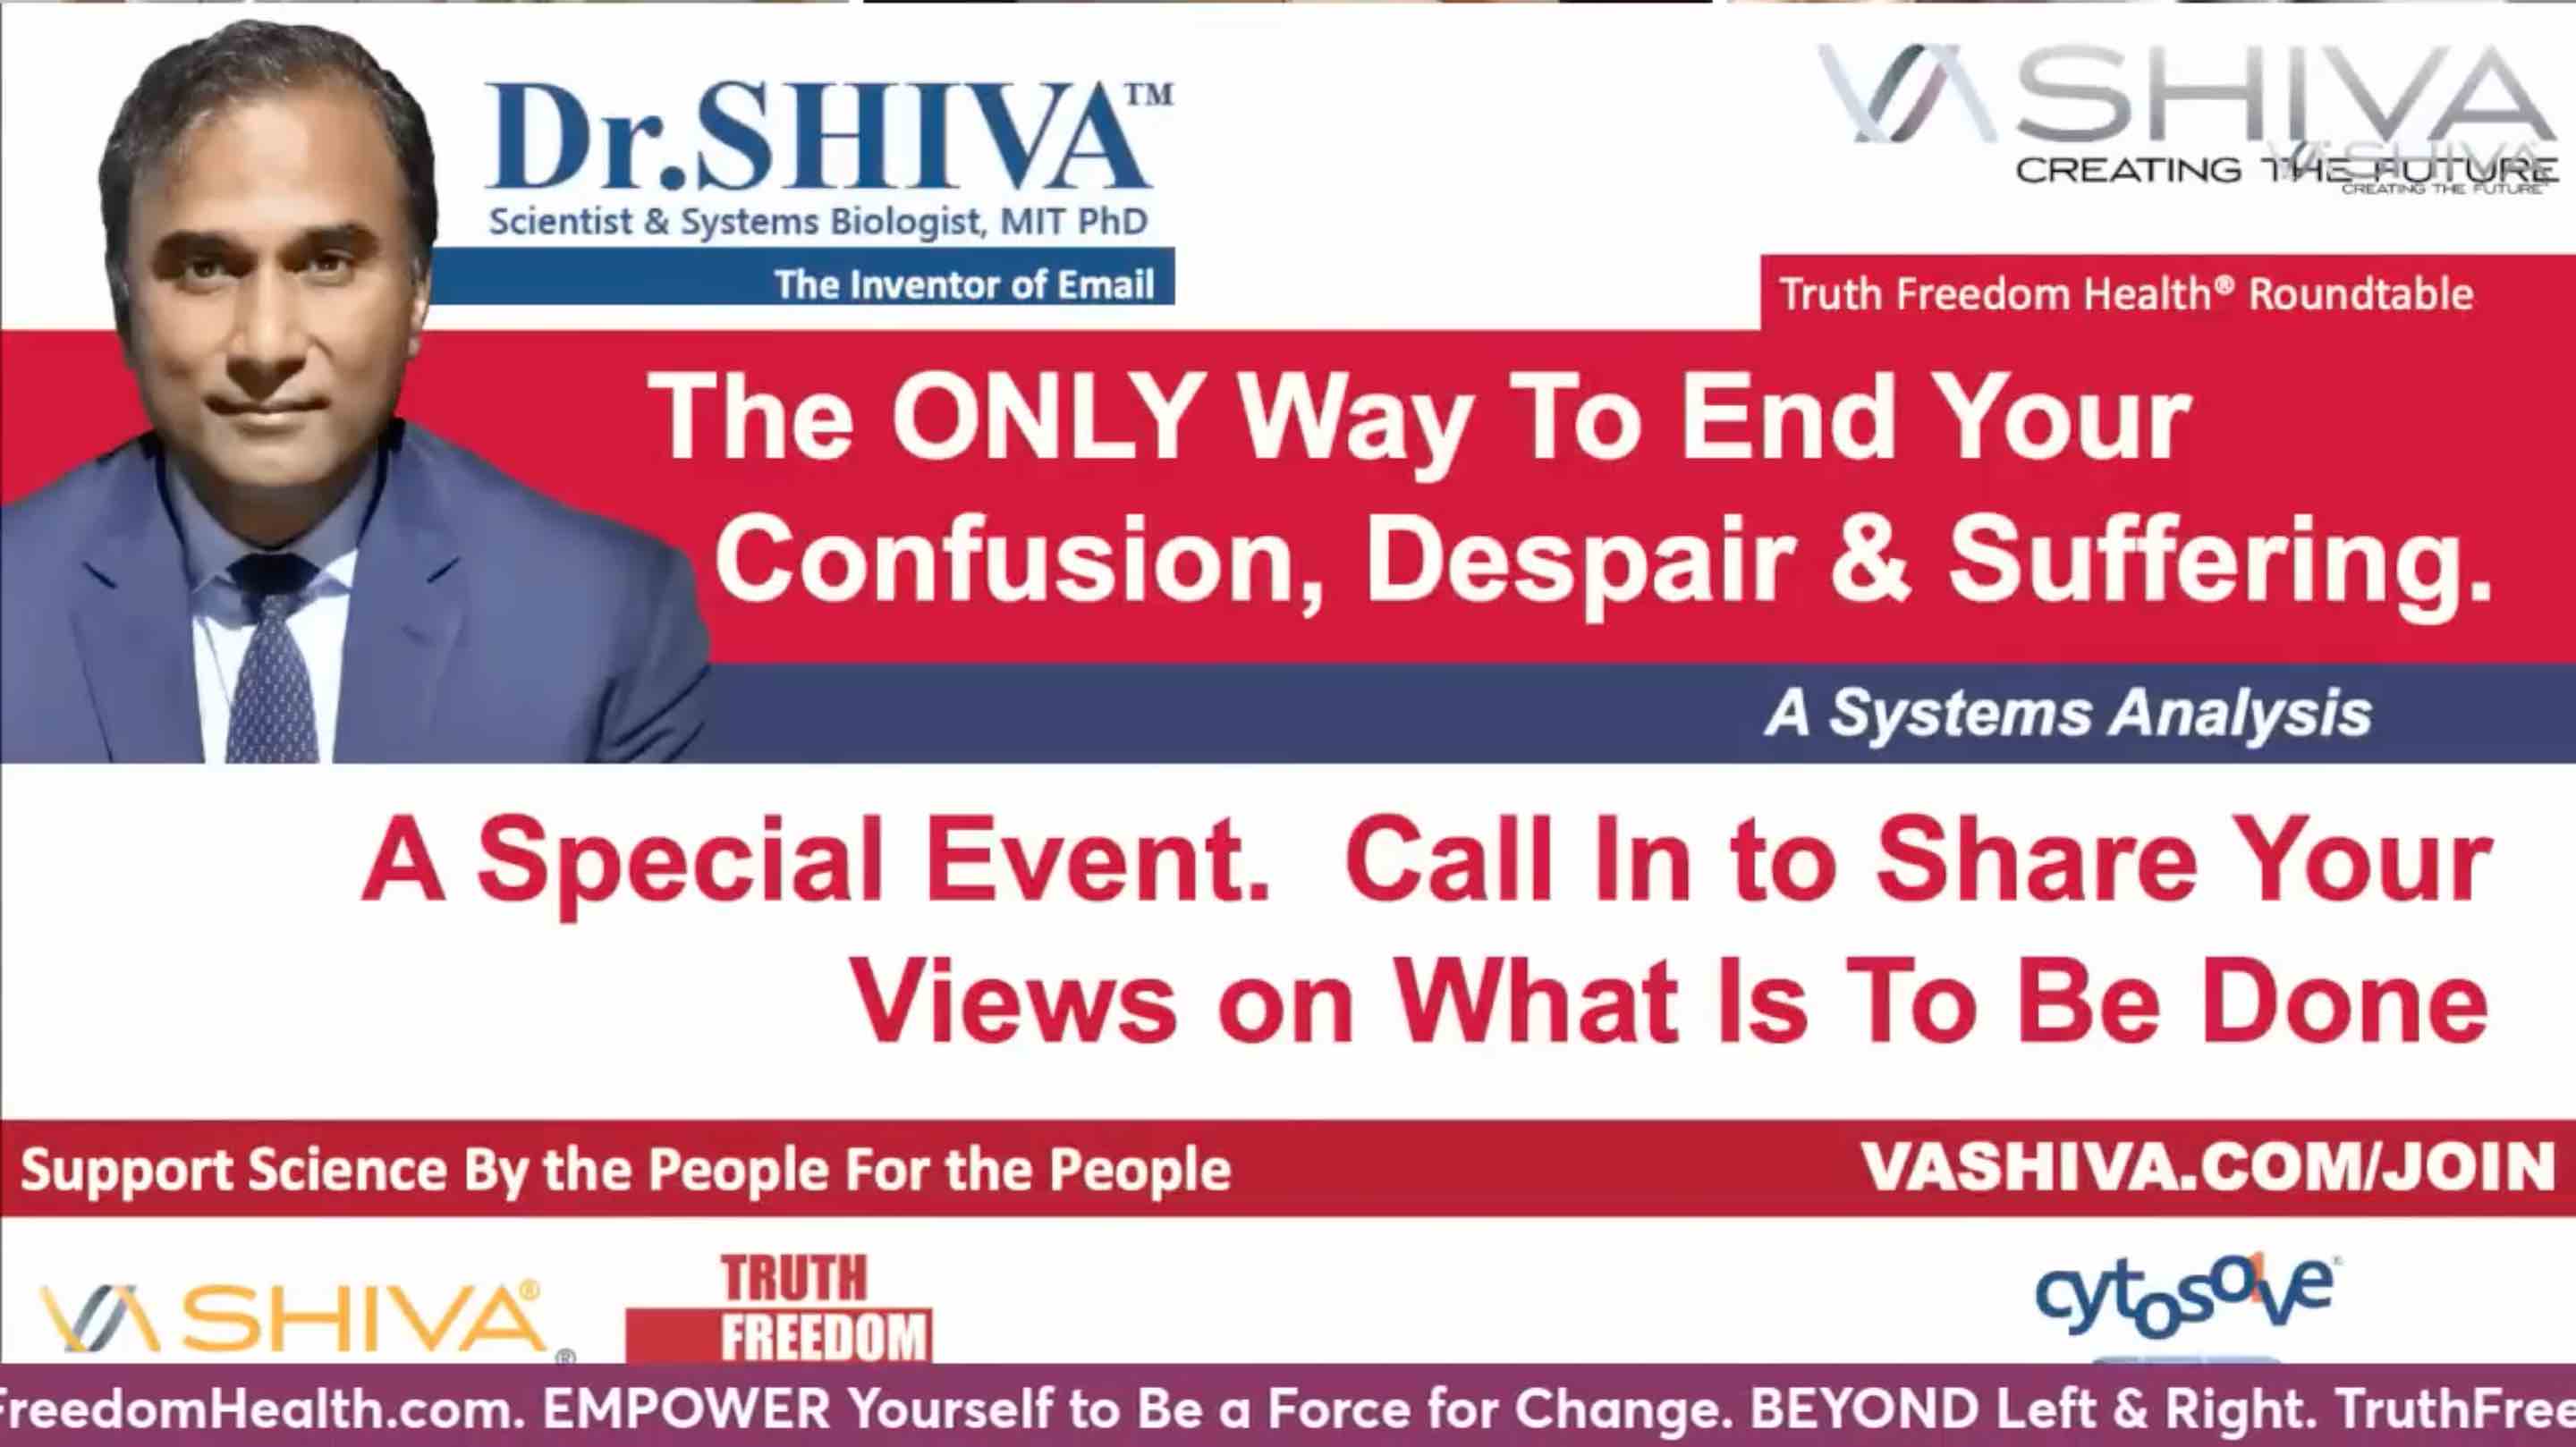 Dr.SHIVA LIVE: The ONLY Way To End Your Confusion, Despair & Suffering.